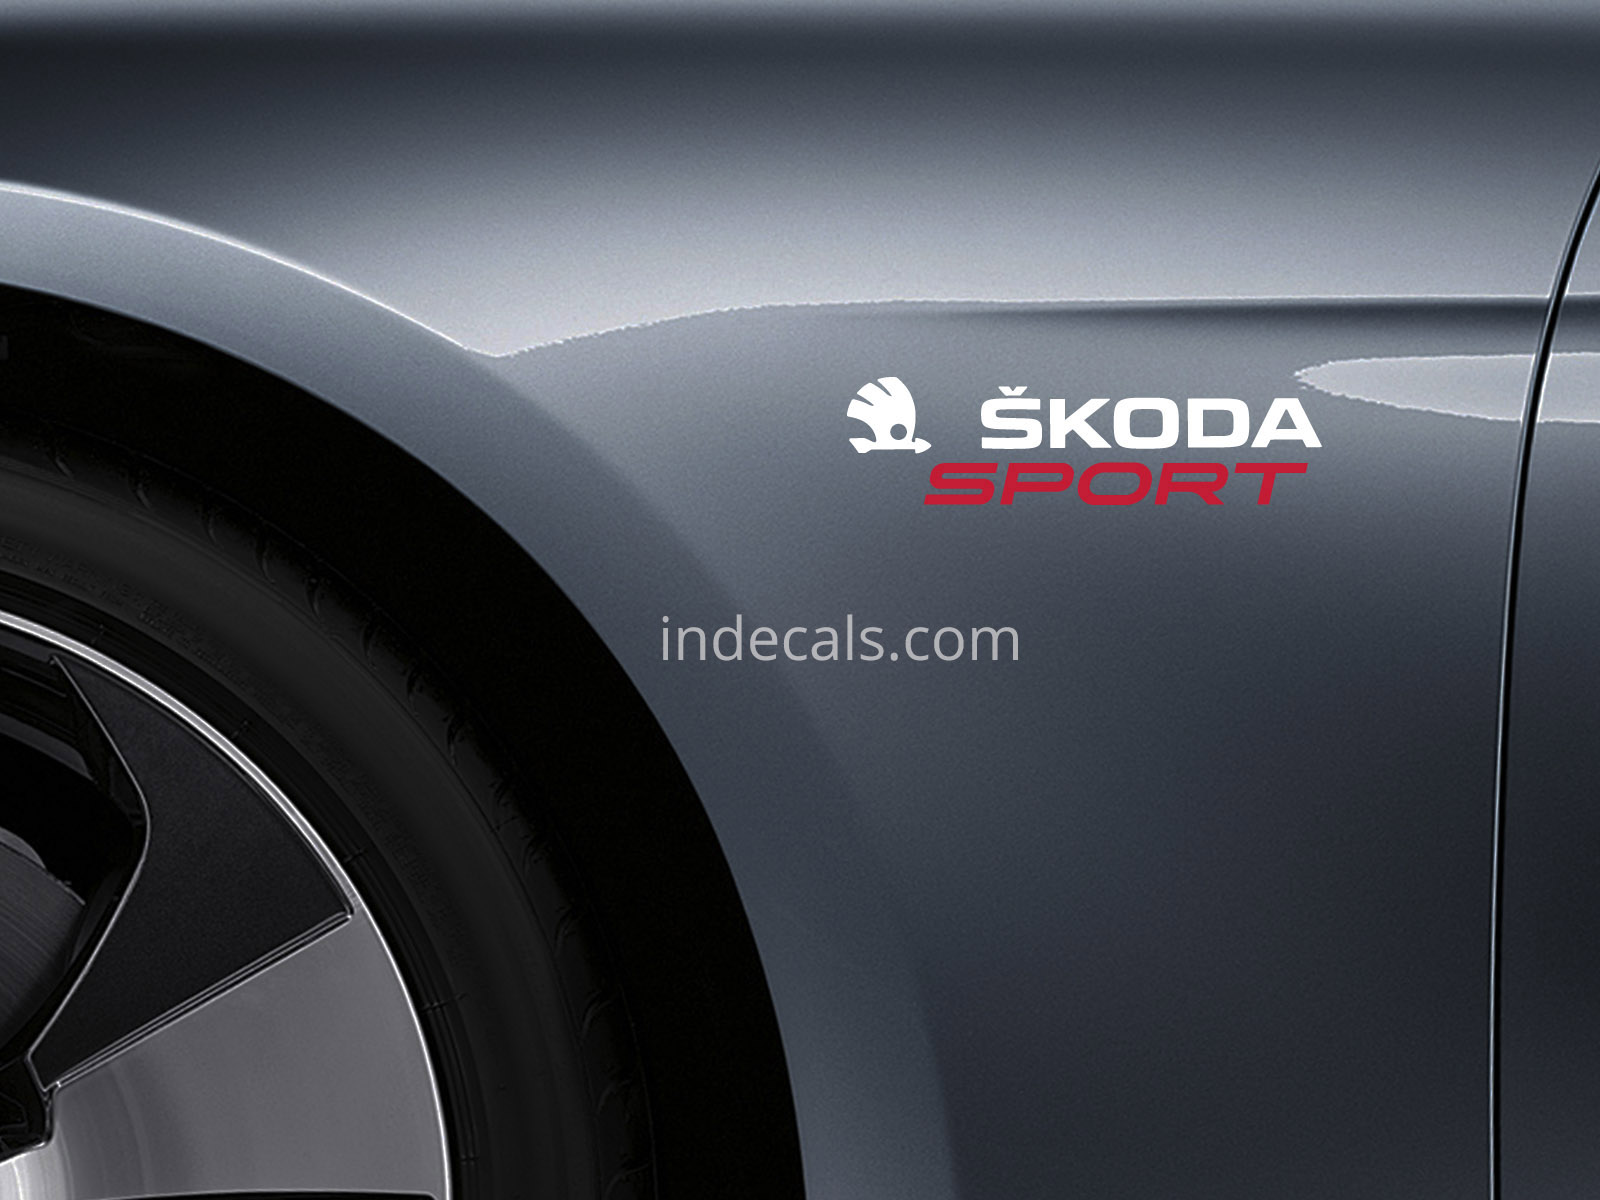 2 x Skoda Sports Stickers for Wings - White & Red